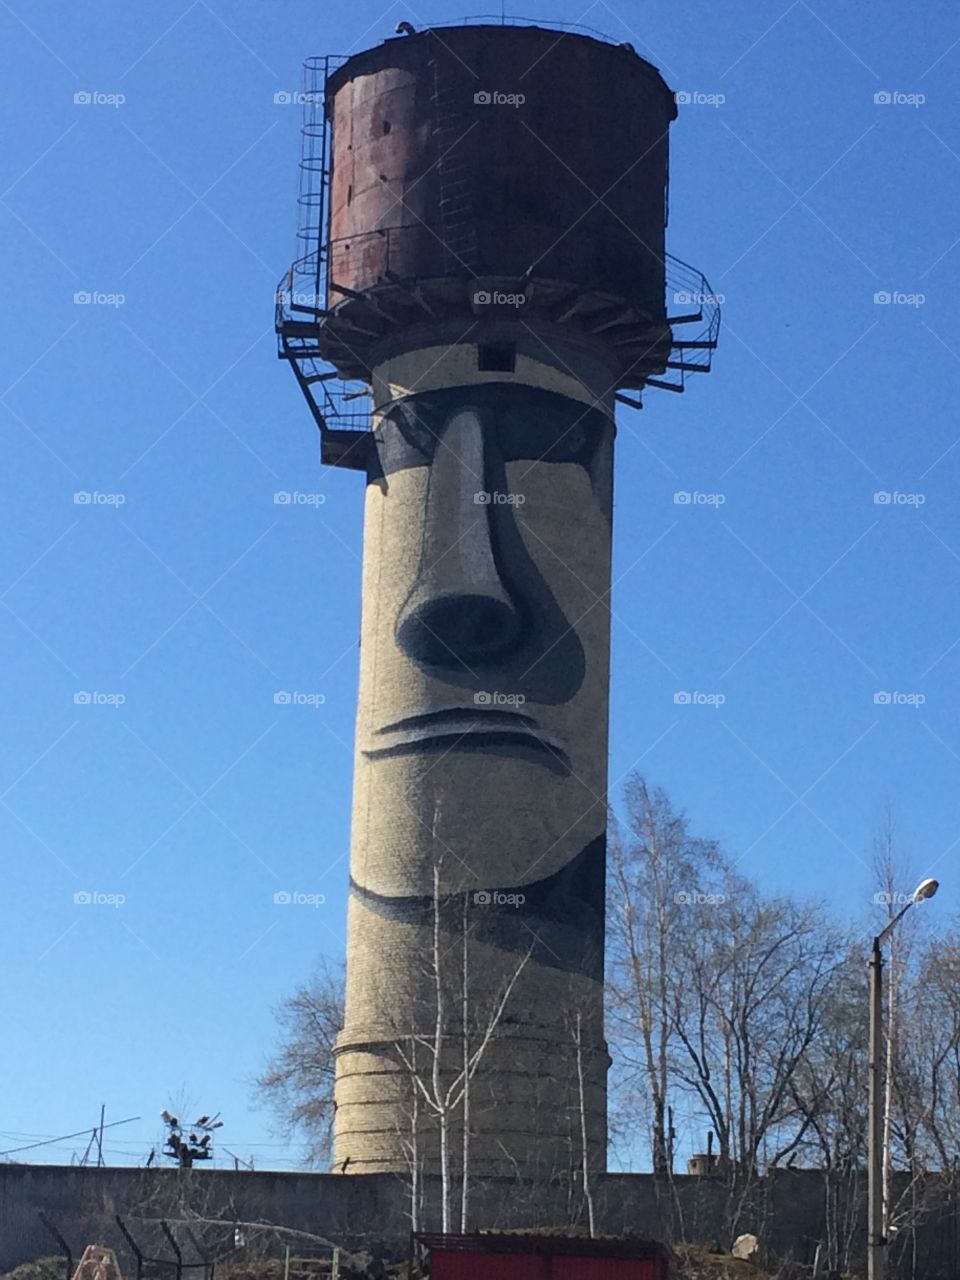 water tower in the style of Easter Island